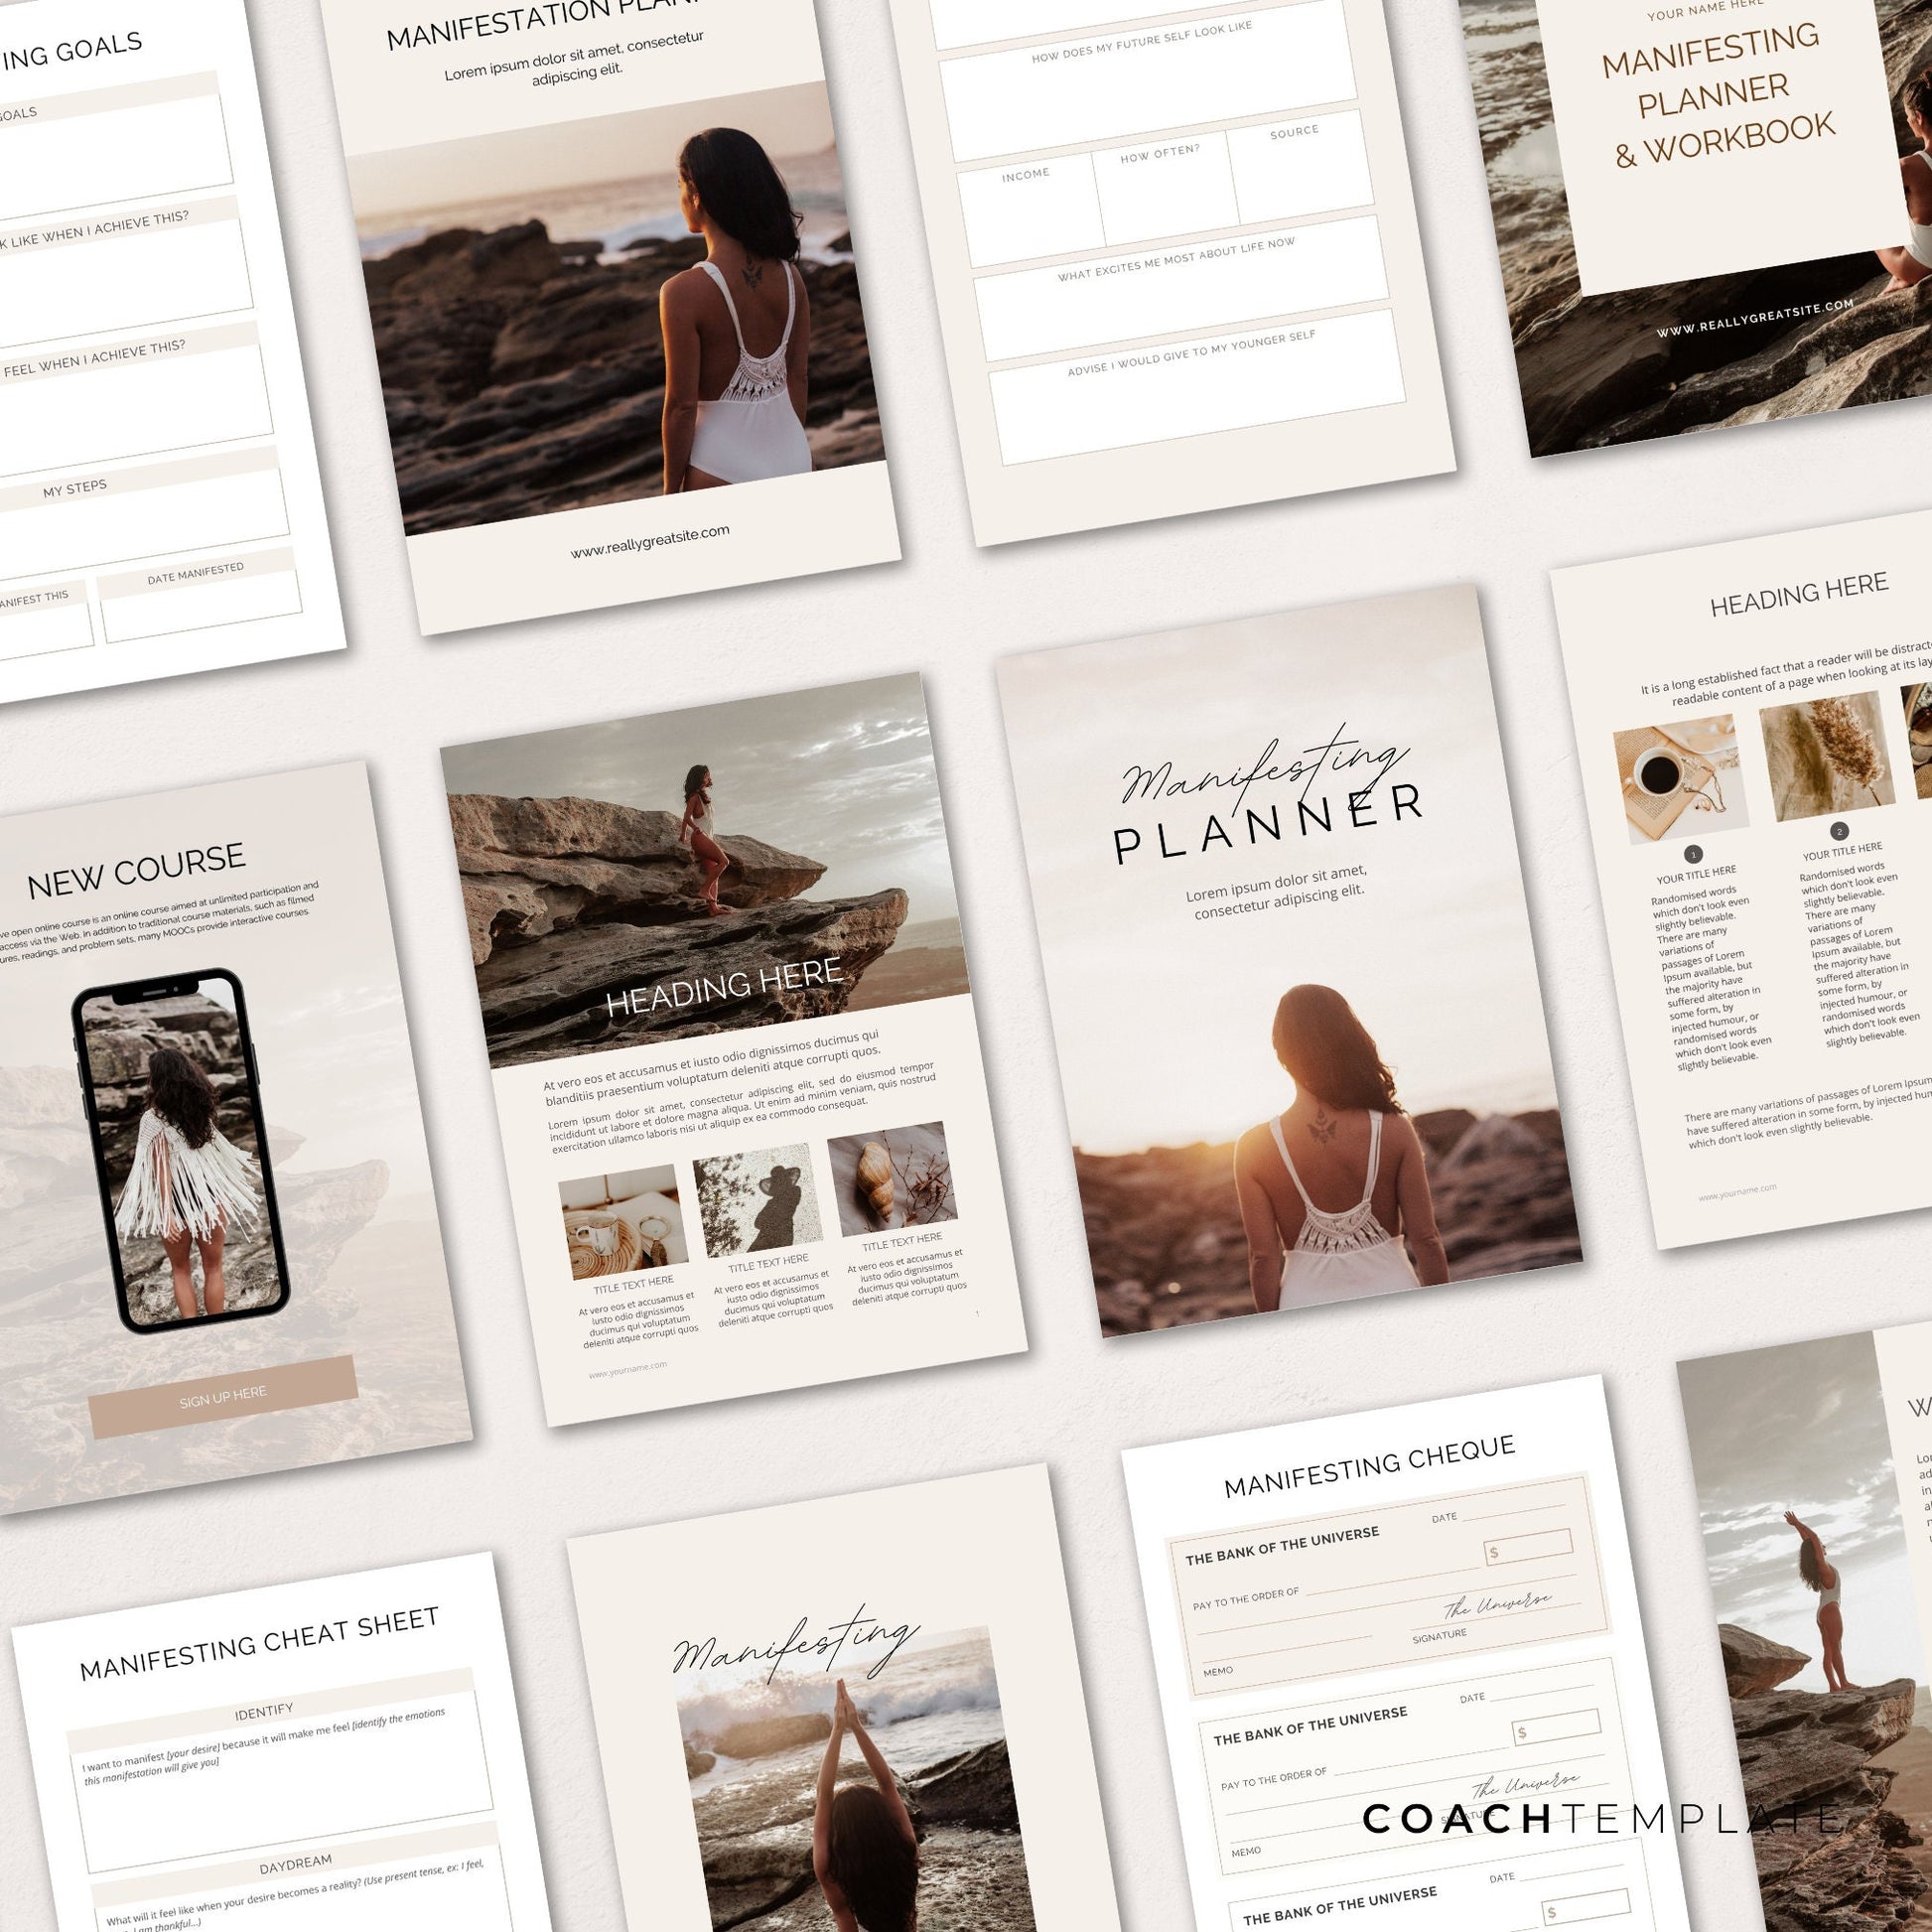 Editable Manifesting ebook Planner Workbook Journal Canva Template | Commercial Use Manifestation Lead Magnet for life, wellness spiritual coach, blogger small business, or content creator. CT039

CoachTemplate.com